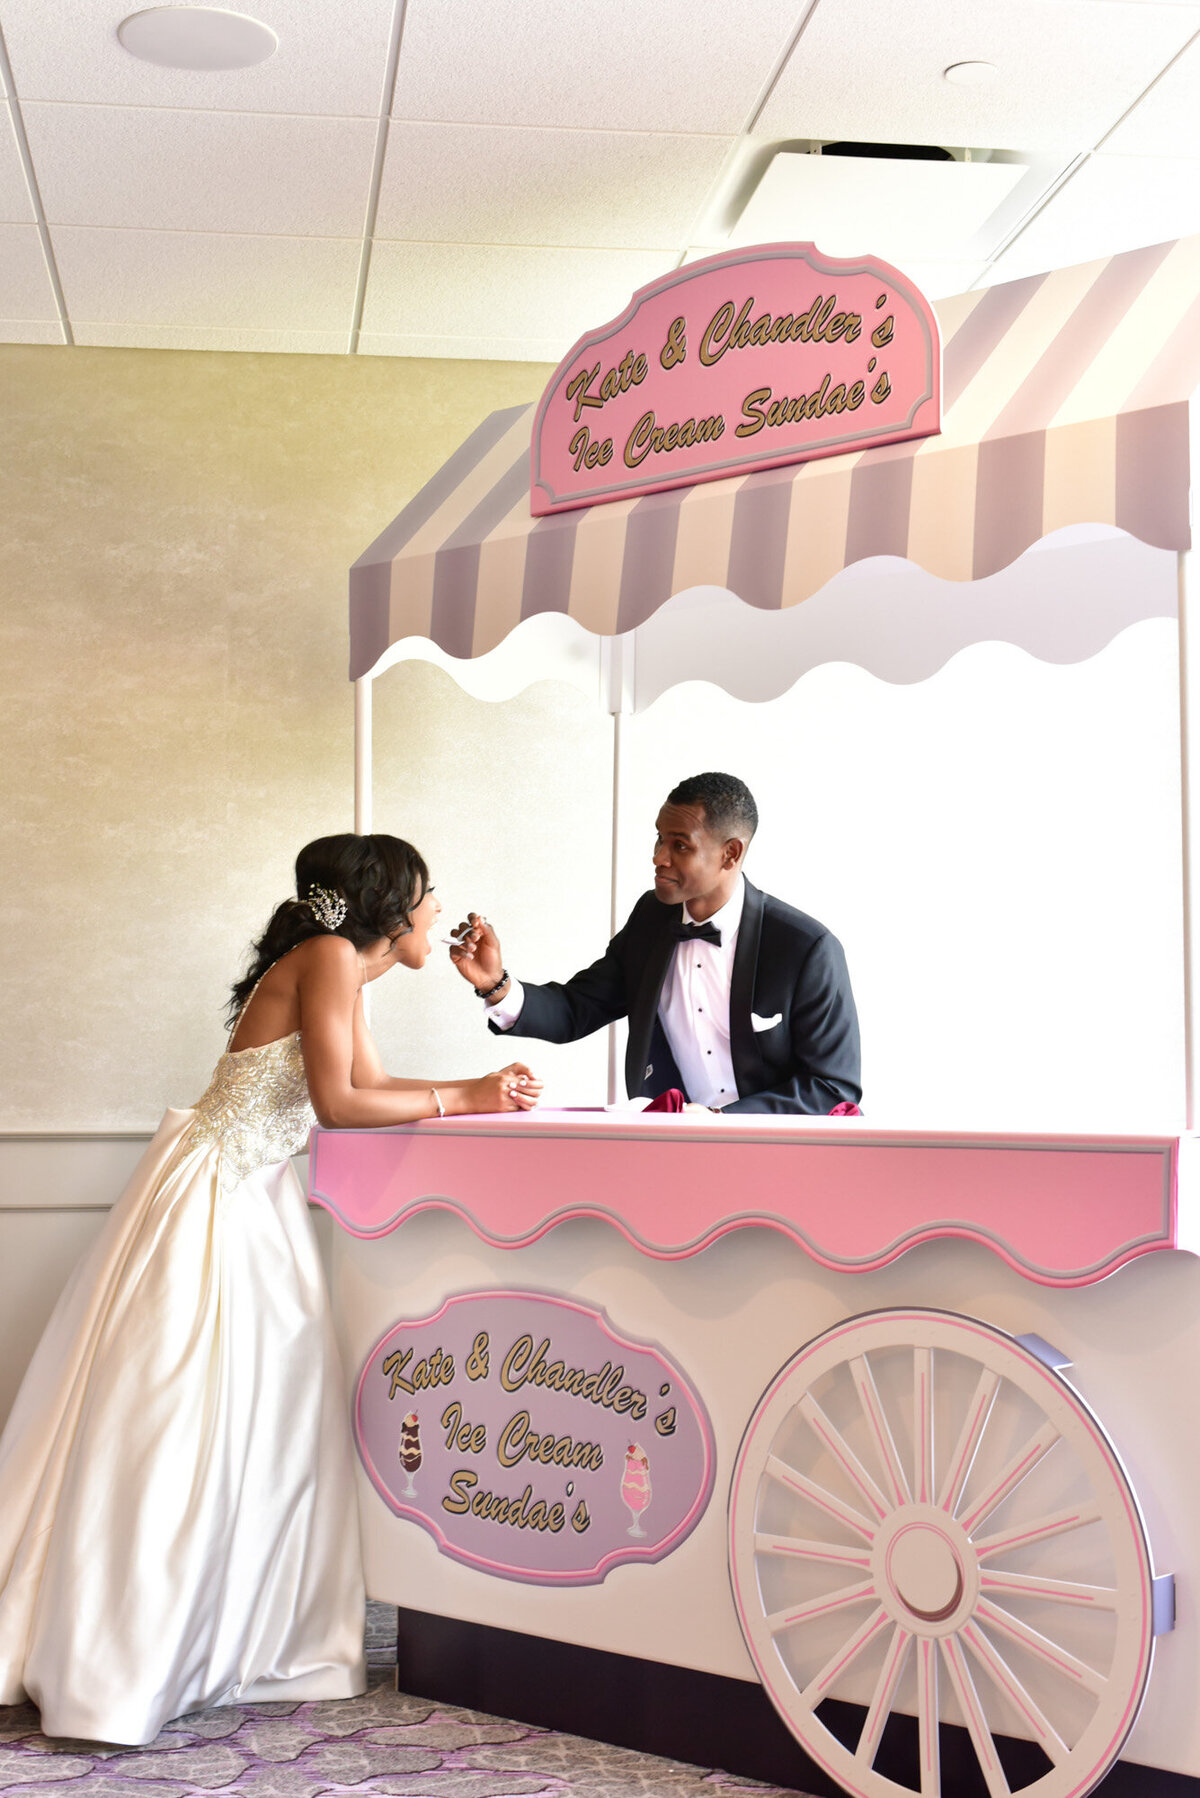 Groom feeding his bride while they both standing and has the dessert cart in between